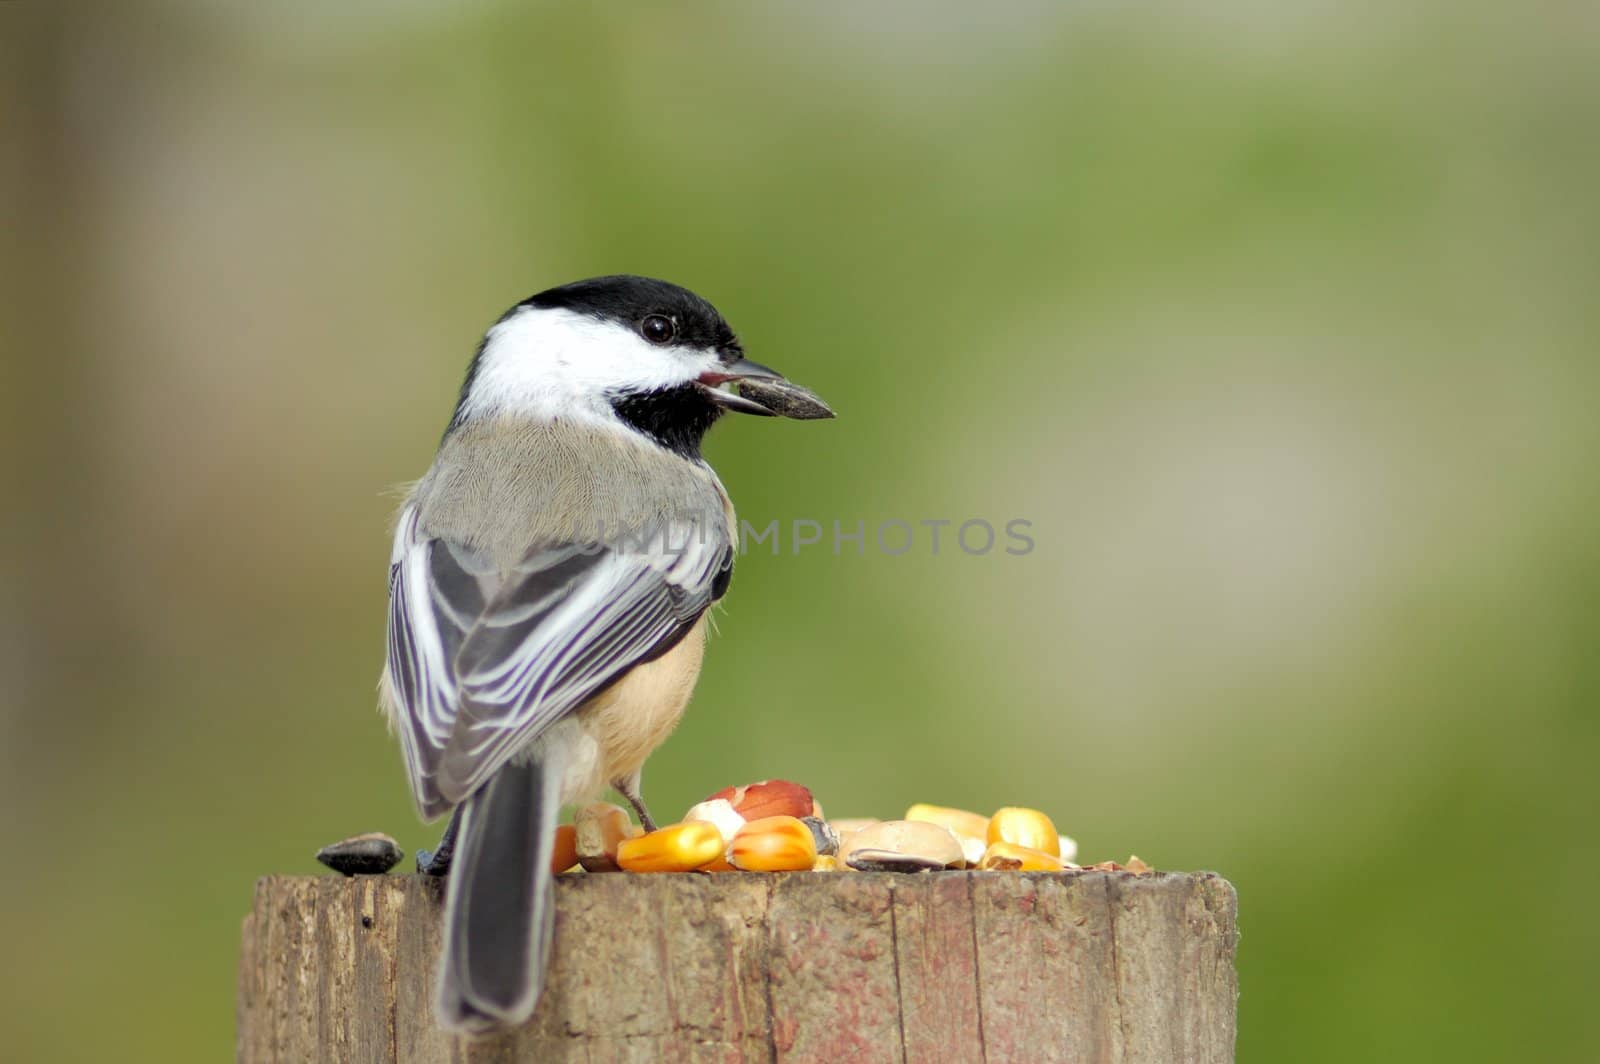 A black-capped chickadee perched on wooden post with bird seed.